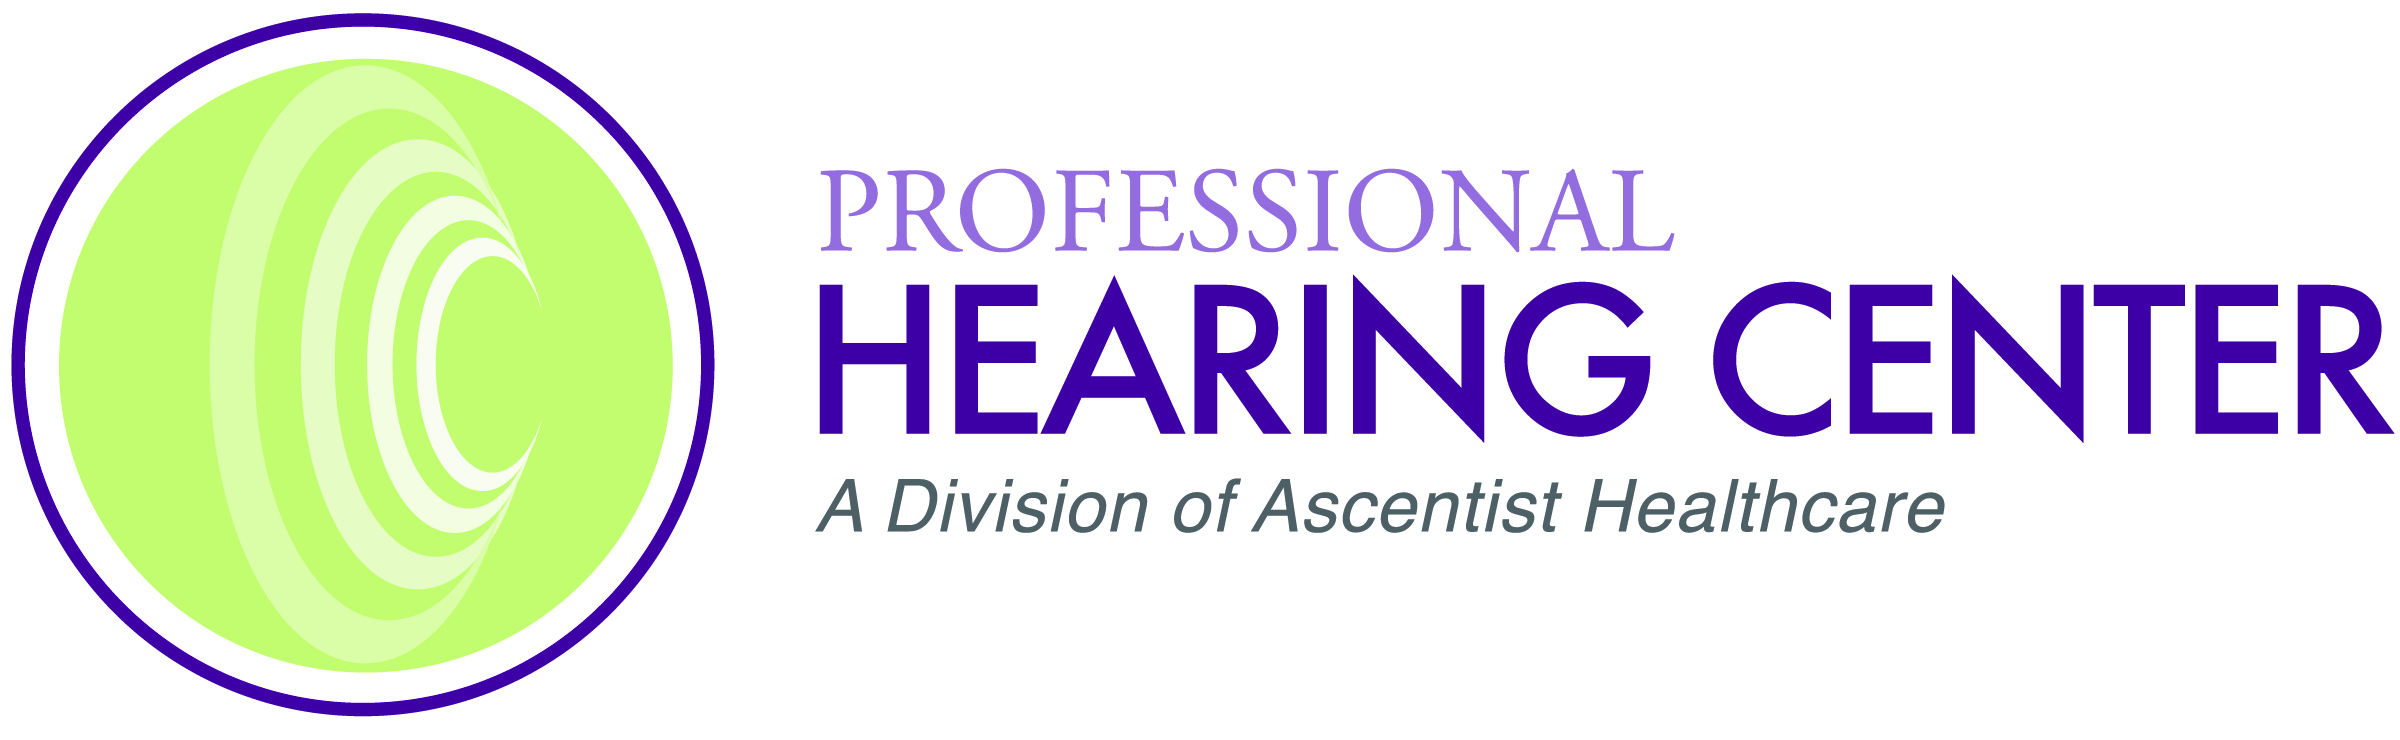 Audiologist: Full Time, Part Time, and PRN available